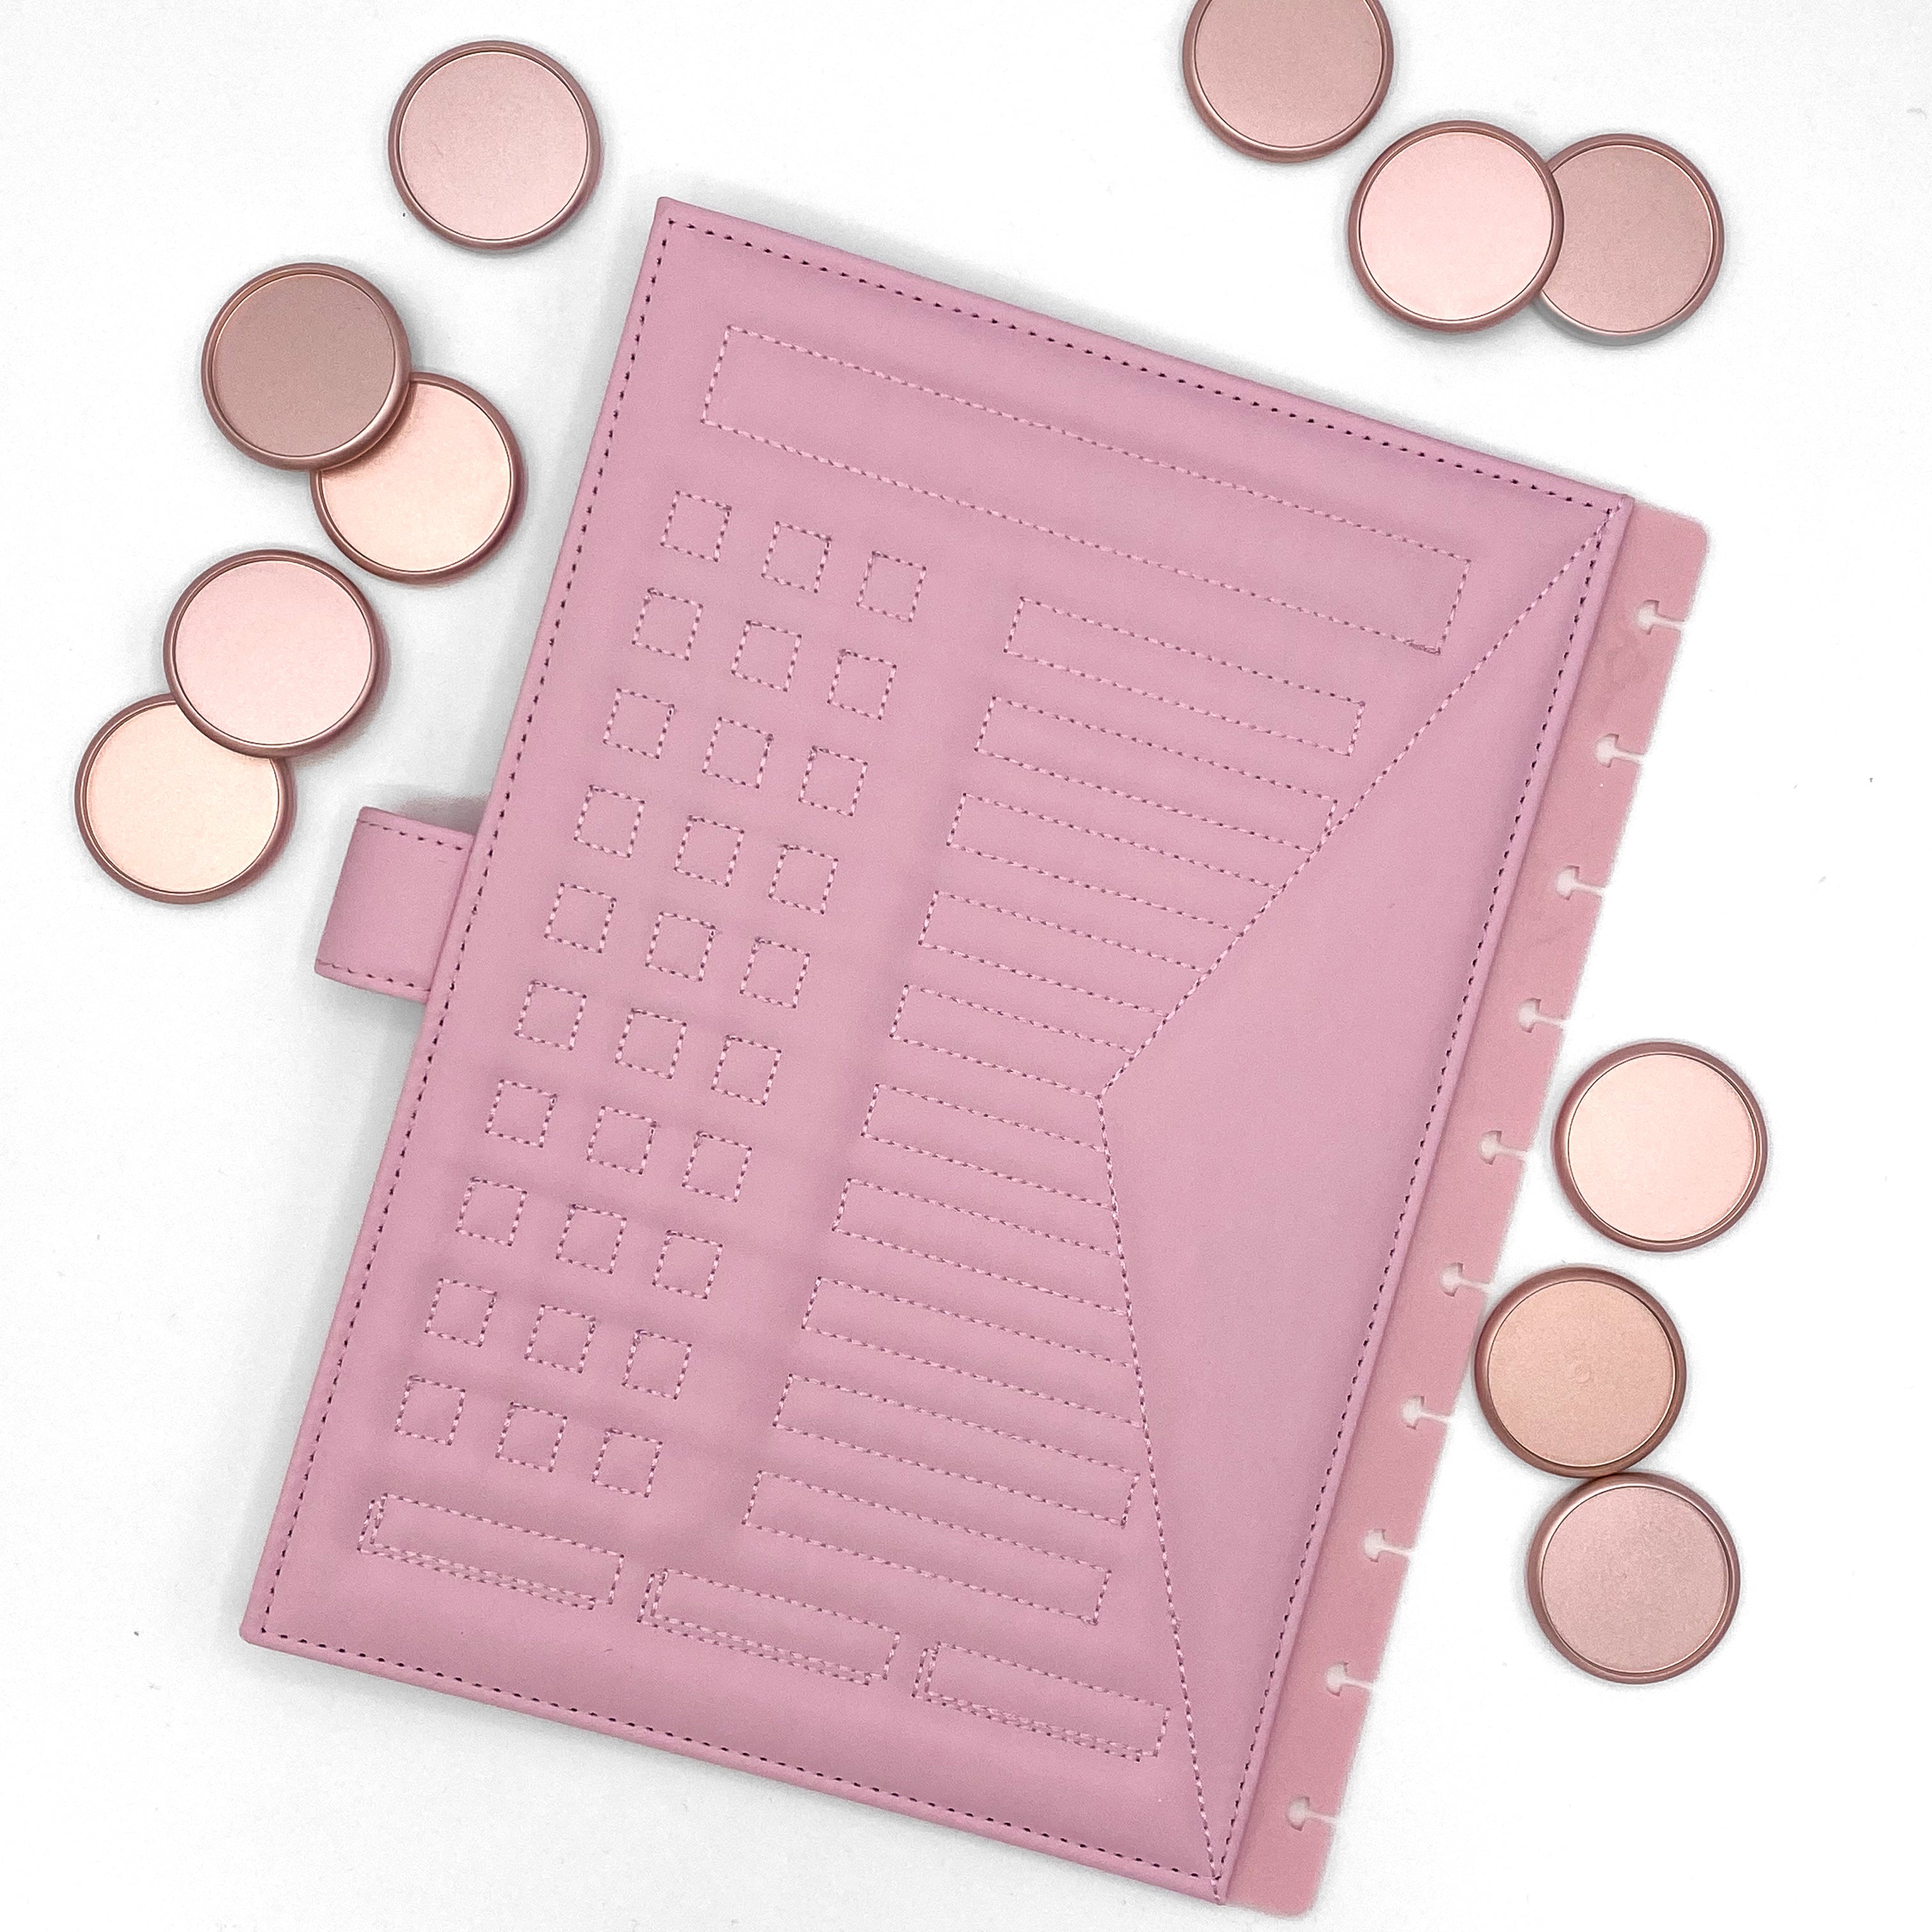 Back cover of pink faux leather planner and rose gold discs